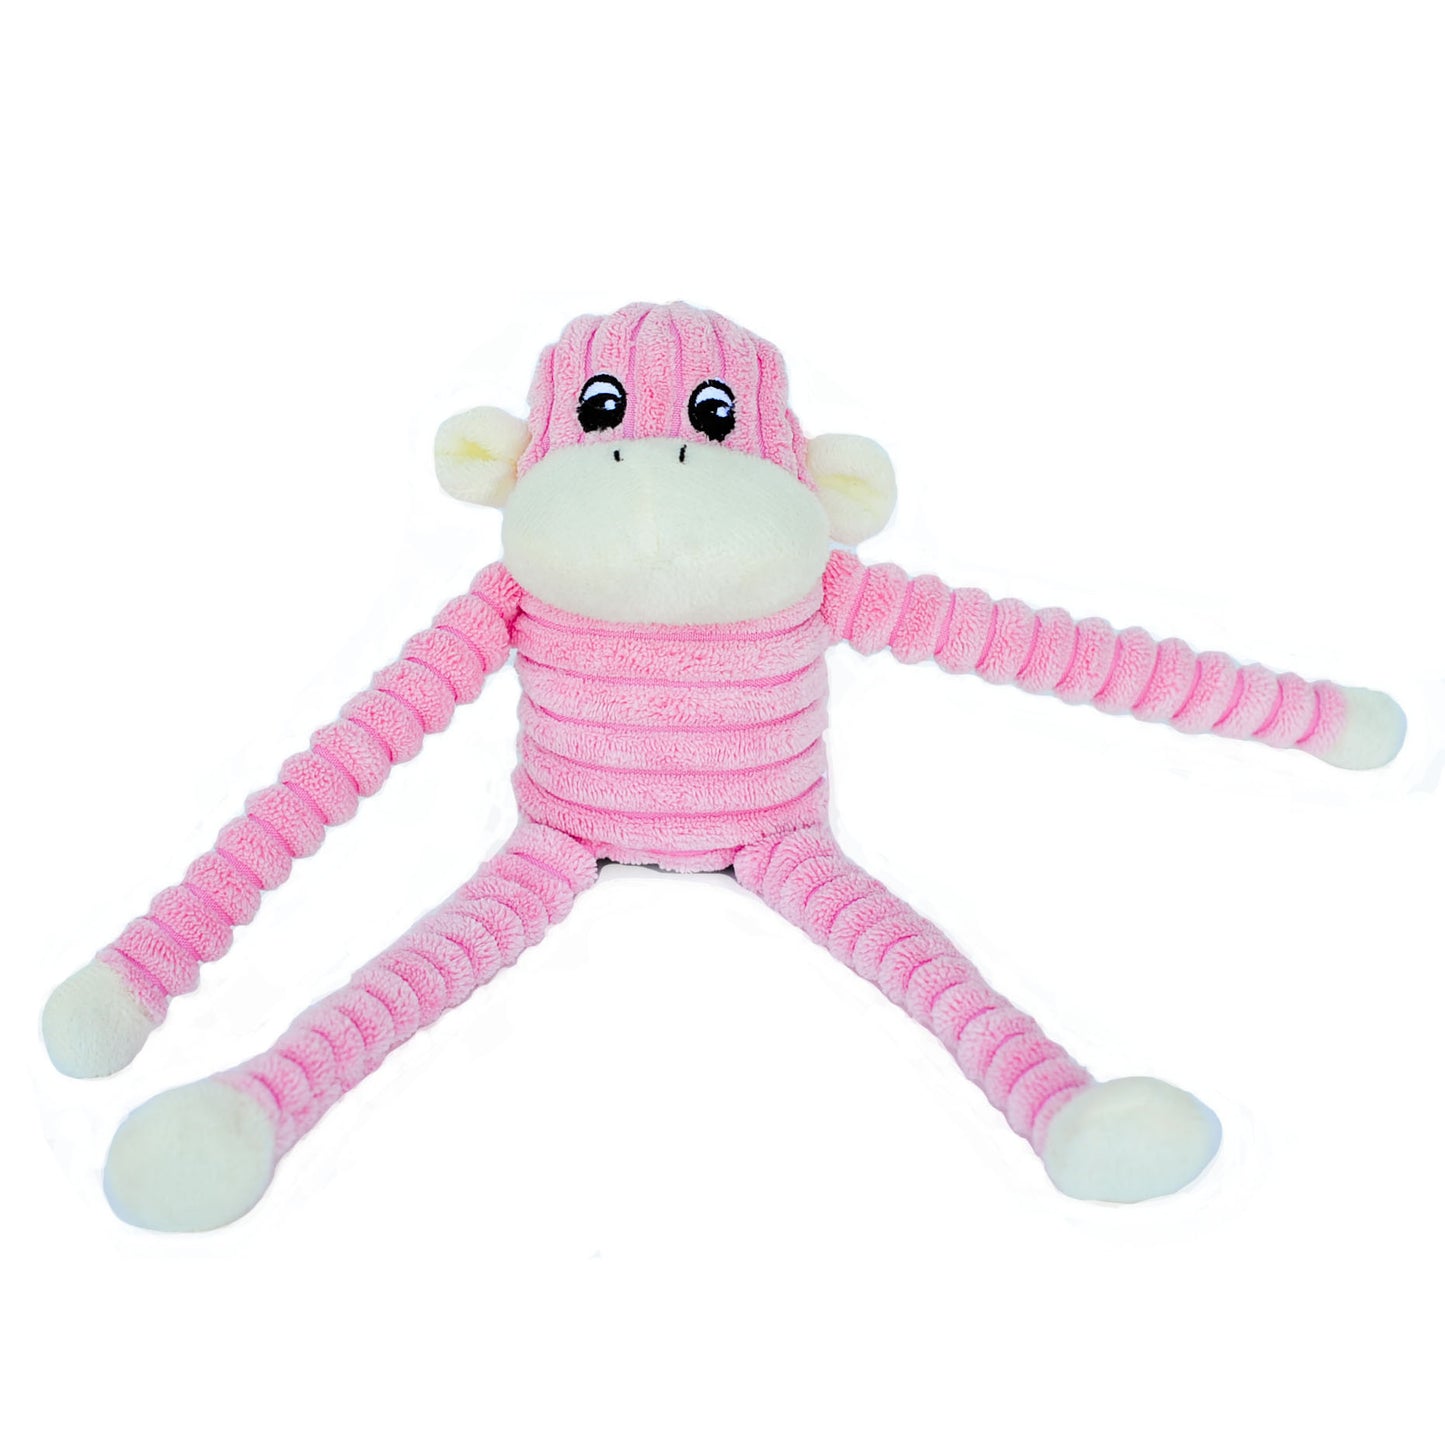 Spencer the Crinkle Monkey - Small - Pink